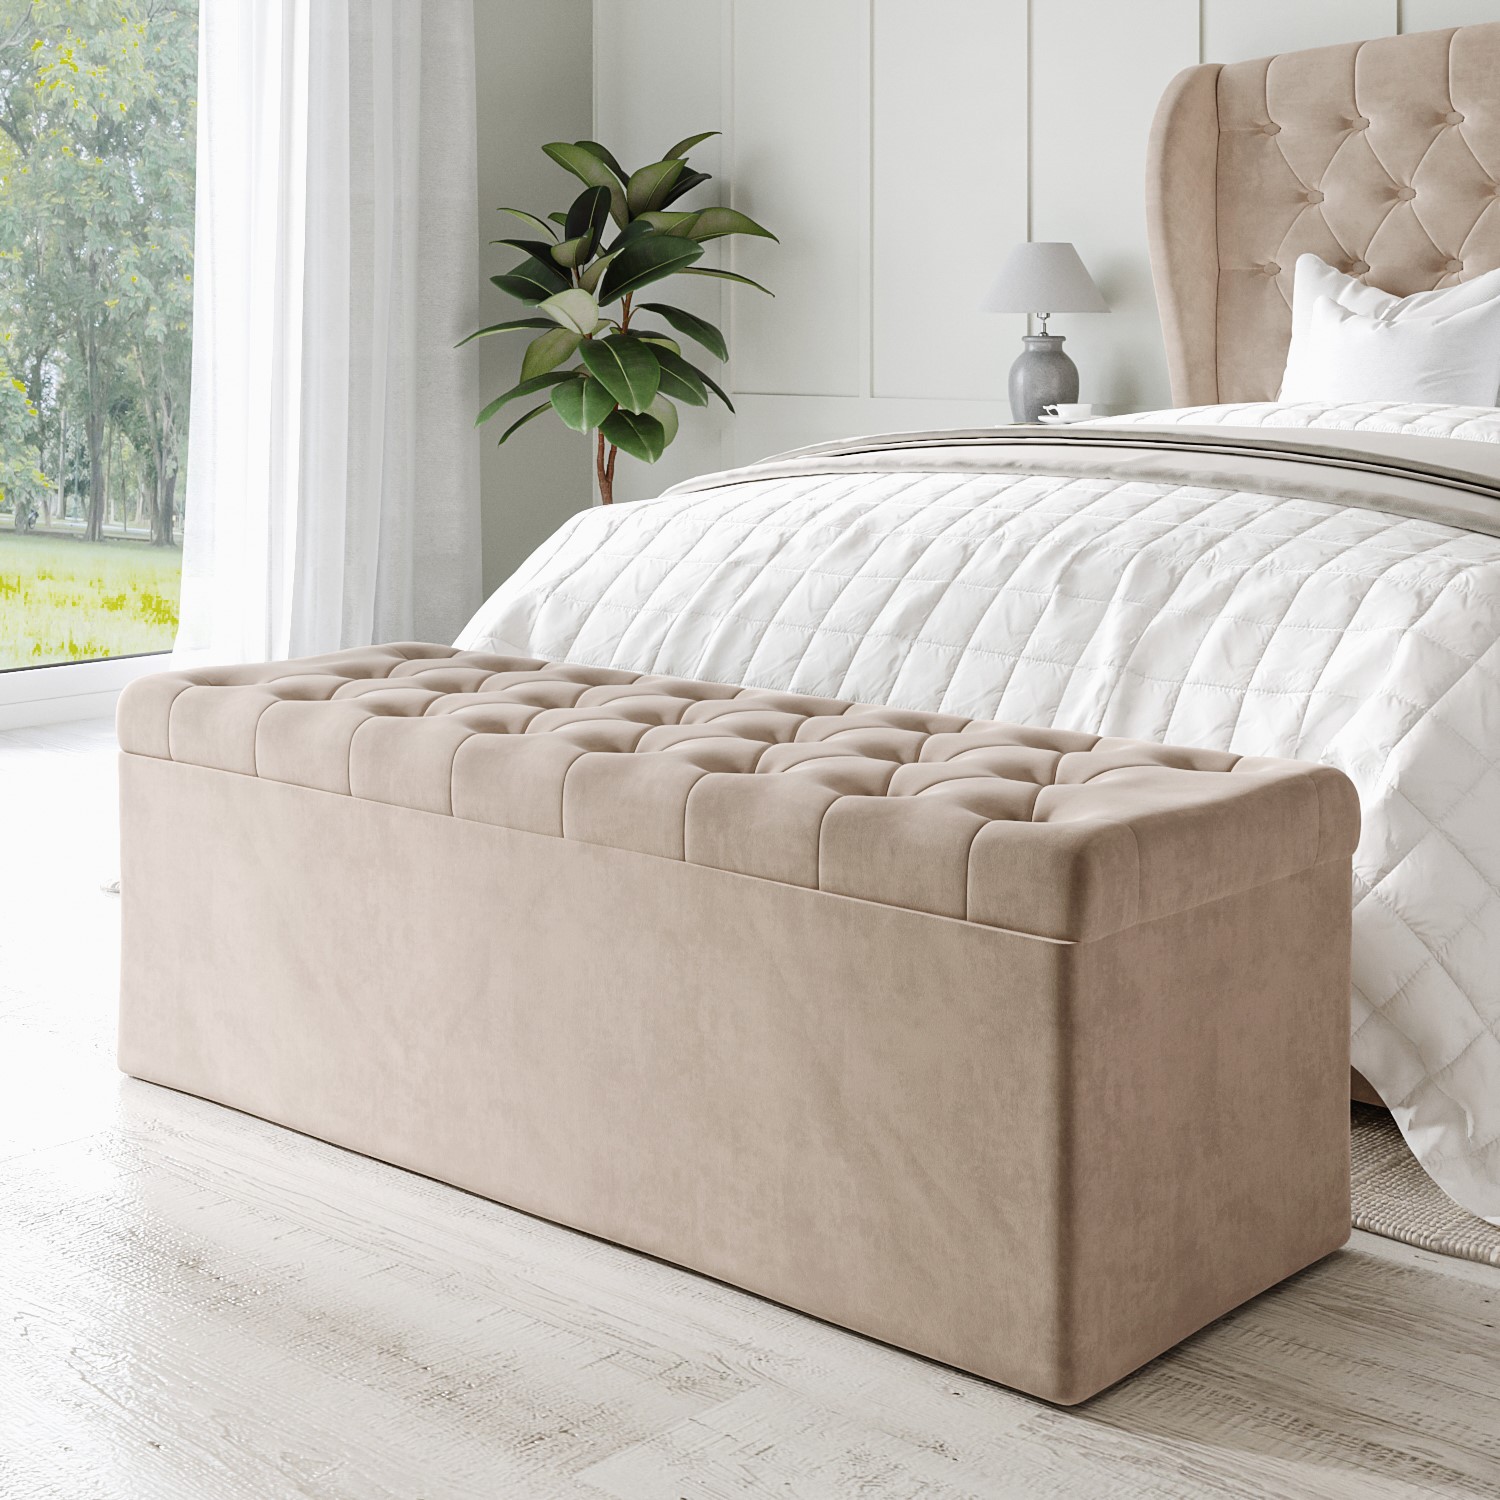 Read more about Beige velvet king size ottoman bed with blanket box safina